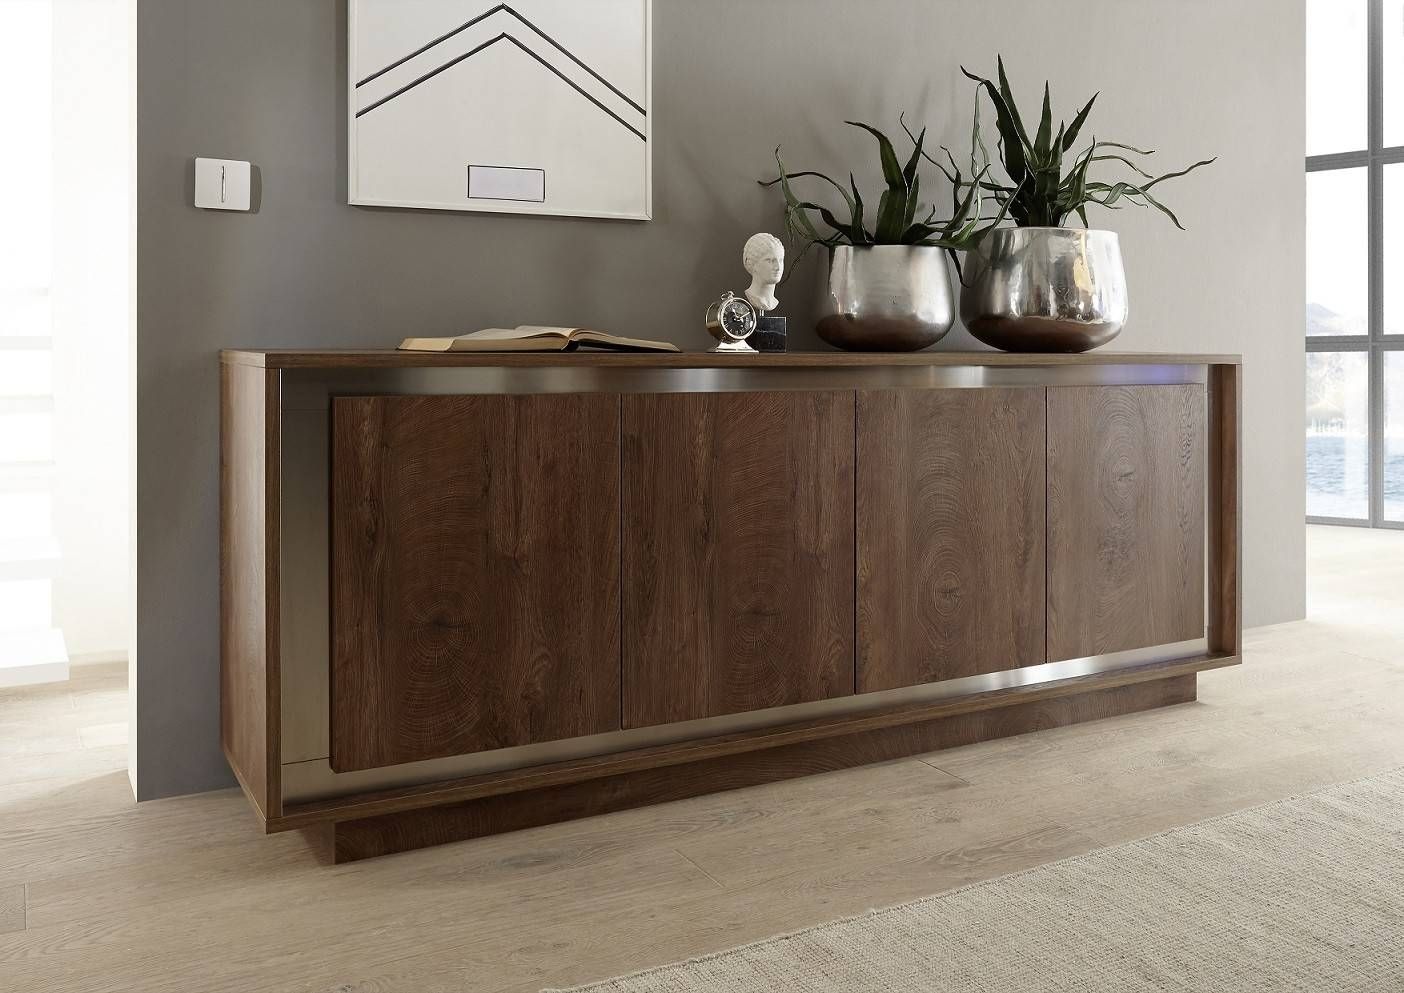 Modern Sideboards Uk – Sena Home Furniture Within Most Recent Hallway Sideboards (View 10 of 15)